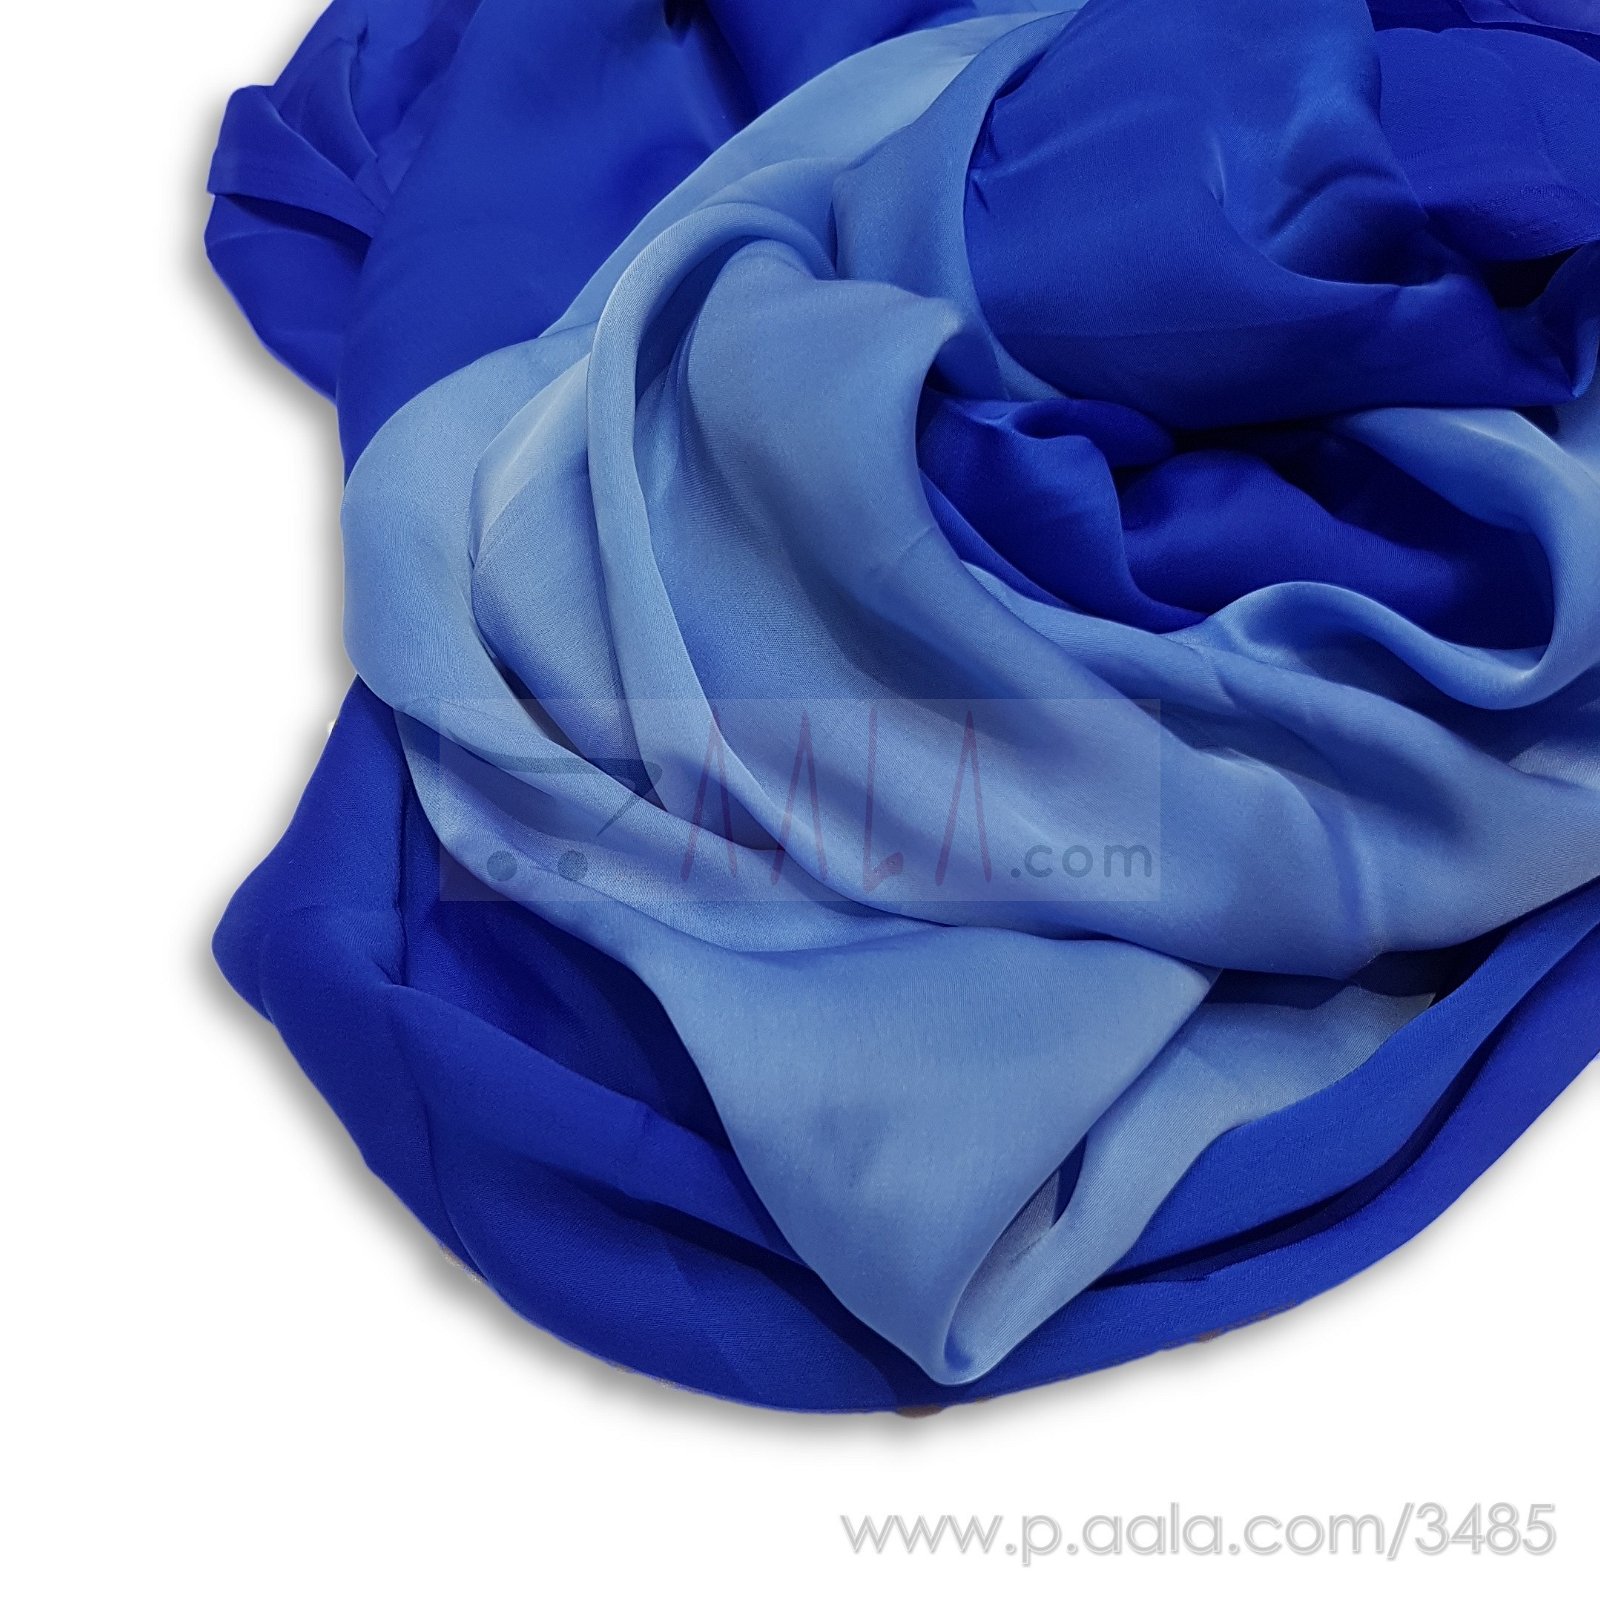 Shaded Satin Georgette Poly-ester 44 Inches Dyed Per Metre #3485